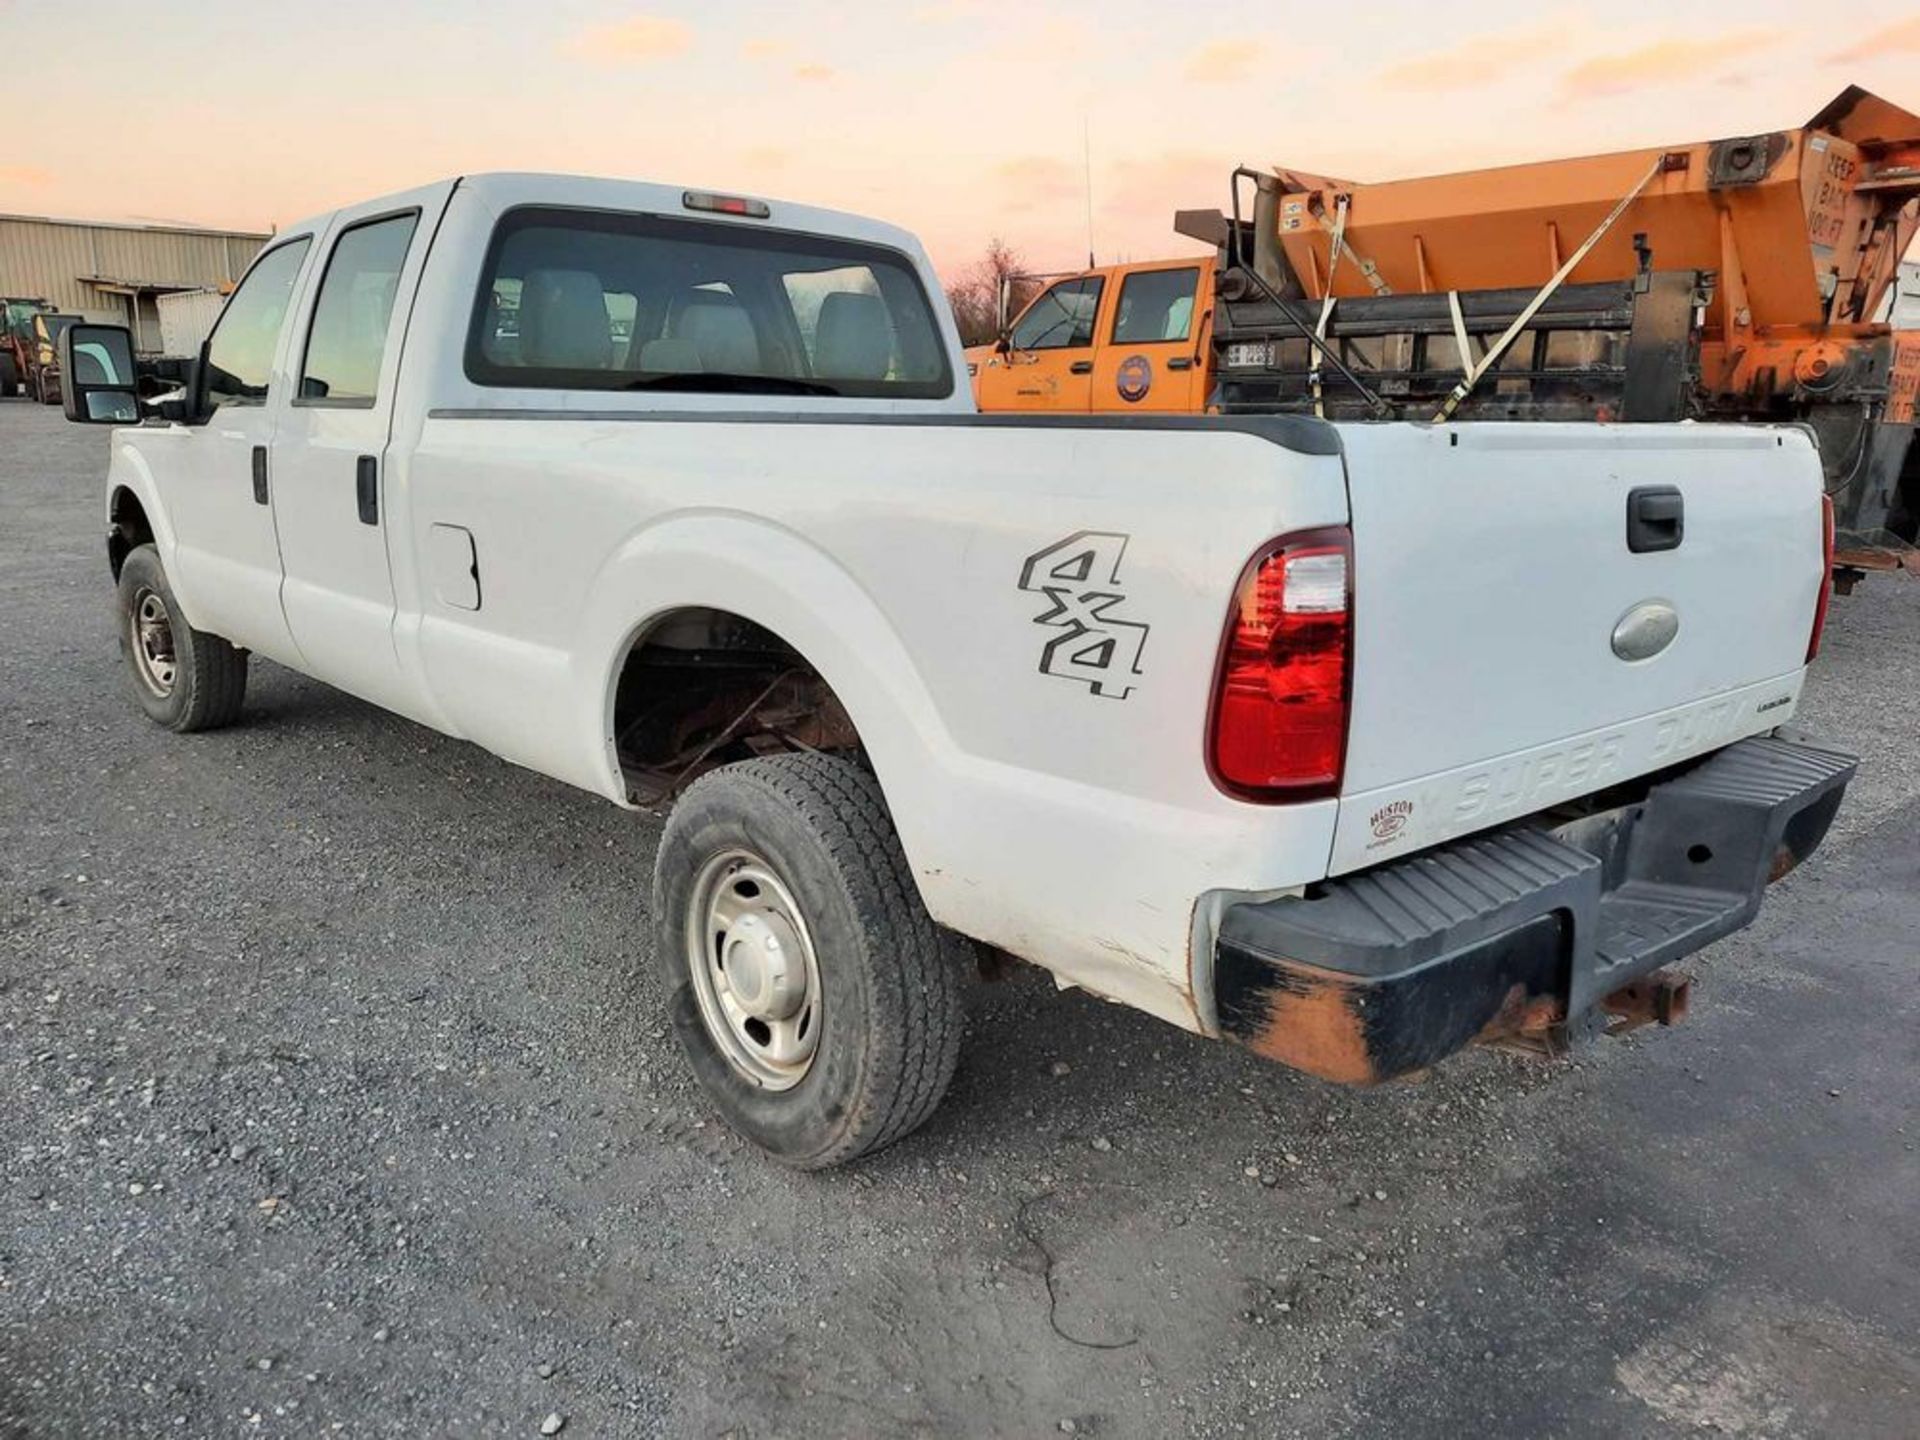 2012 FORD F350 SUPER CAB PICK UP TRUCK - Image 2 of 26